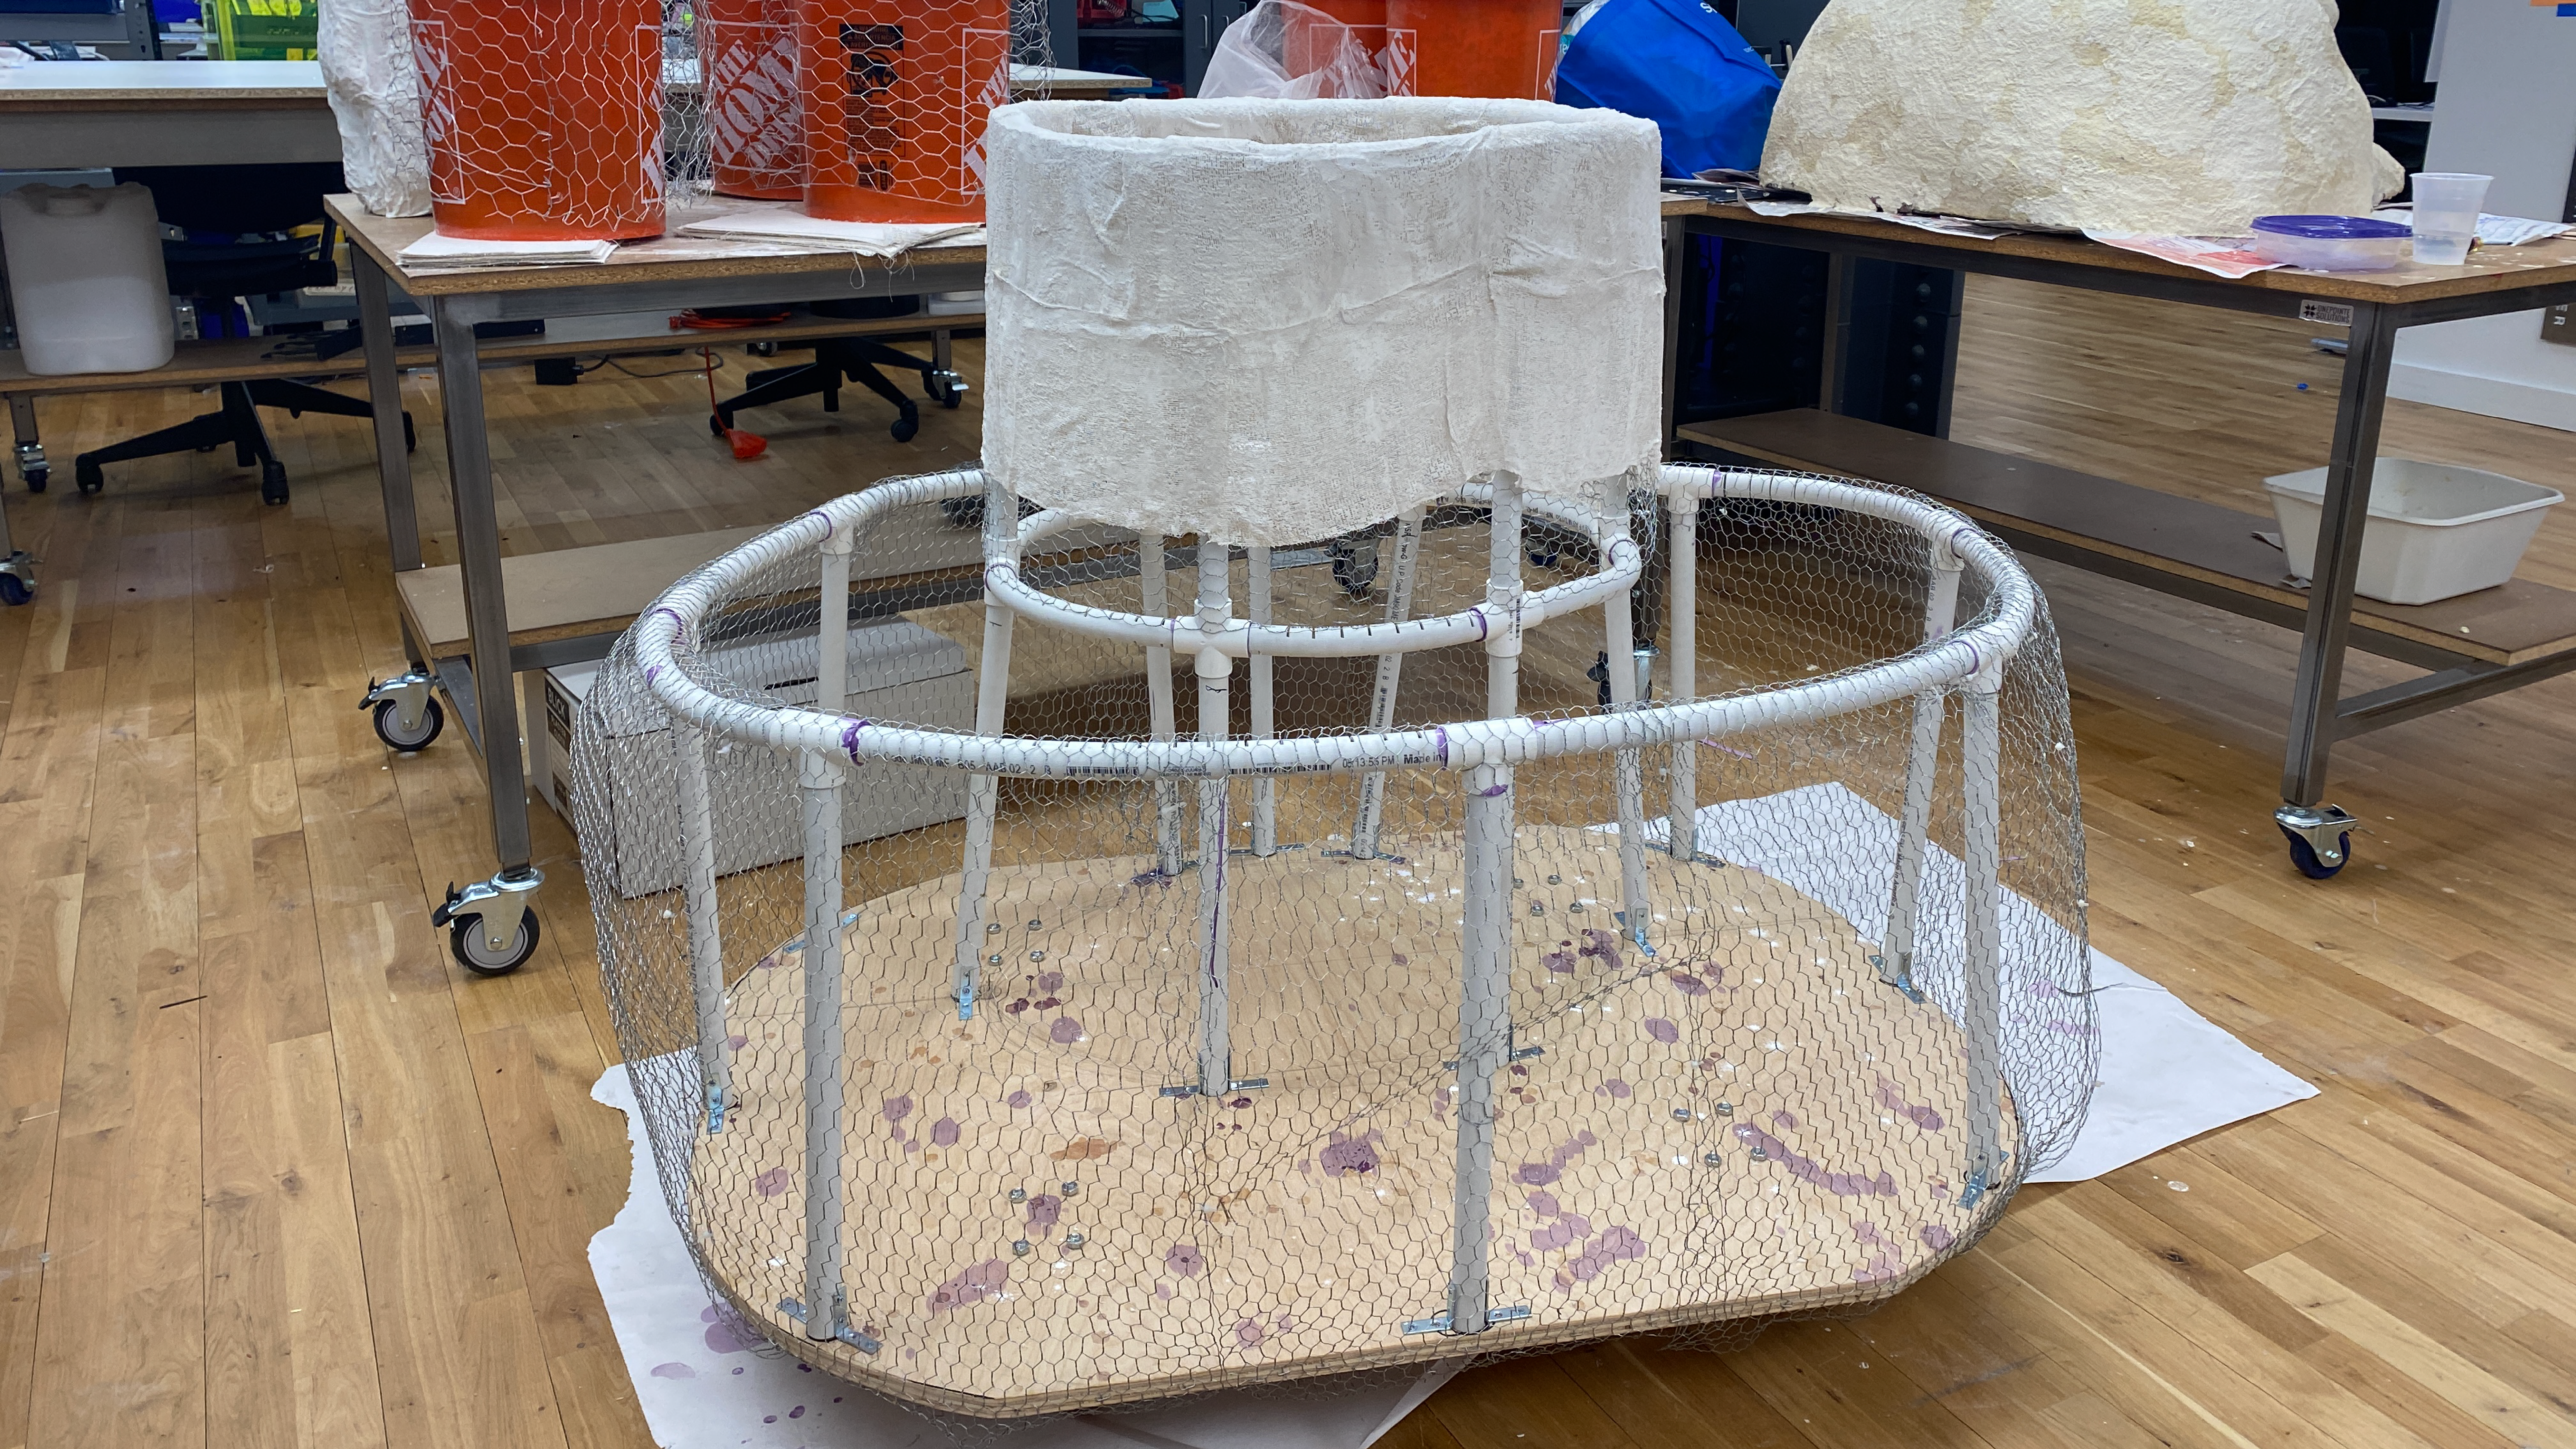 an oval frame of bent PVC pipes covered in a wire mesh and attached to a wood board sits in the middle of a workspace. A center smaller tower inside the larger frame is partially covered with plaster cloth